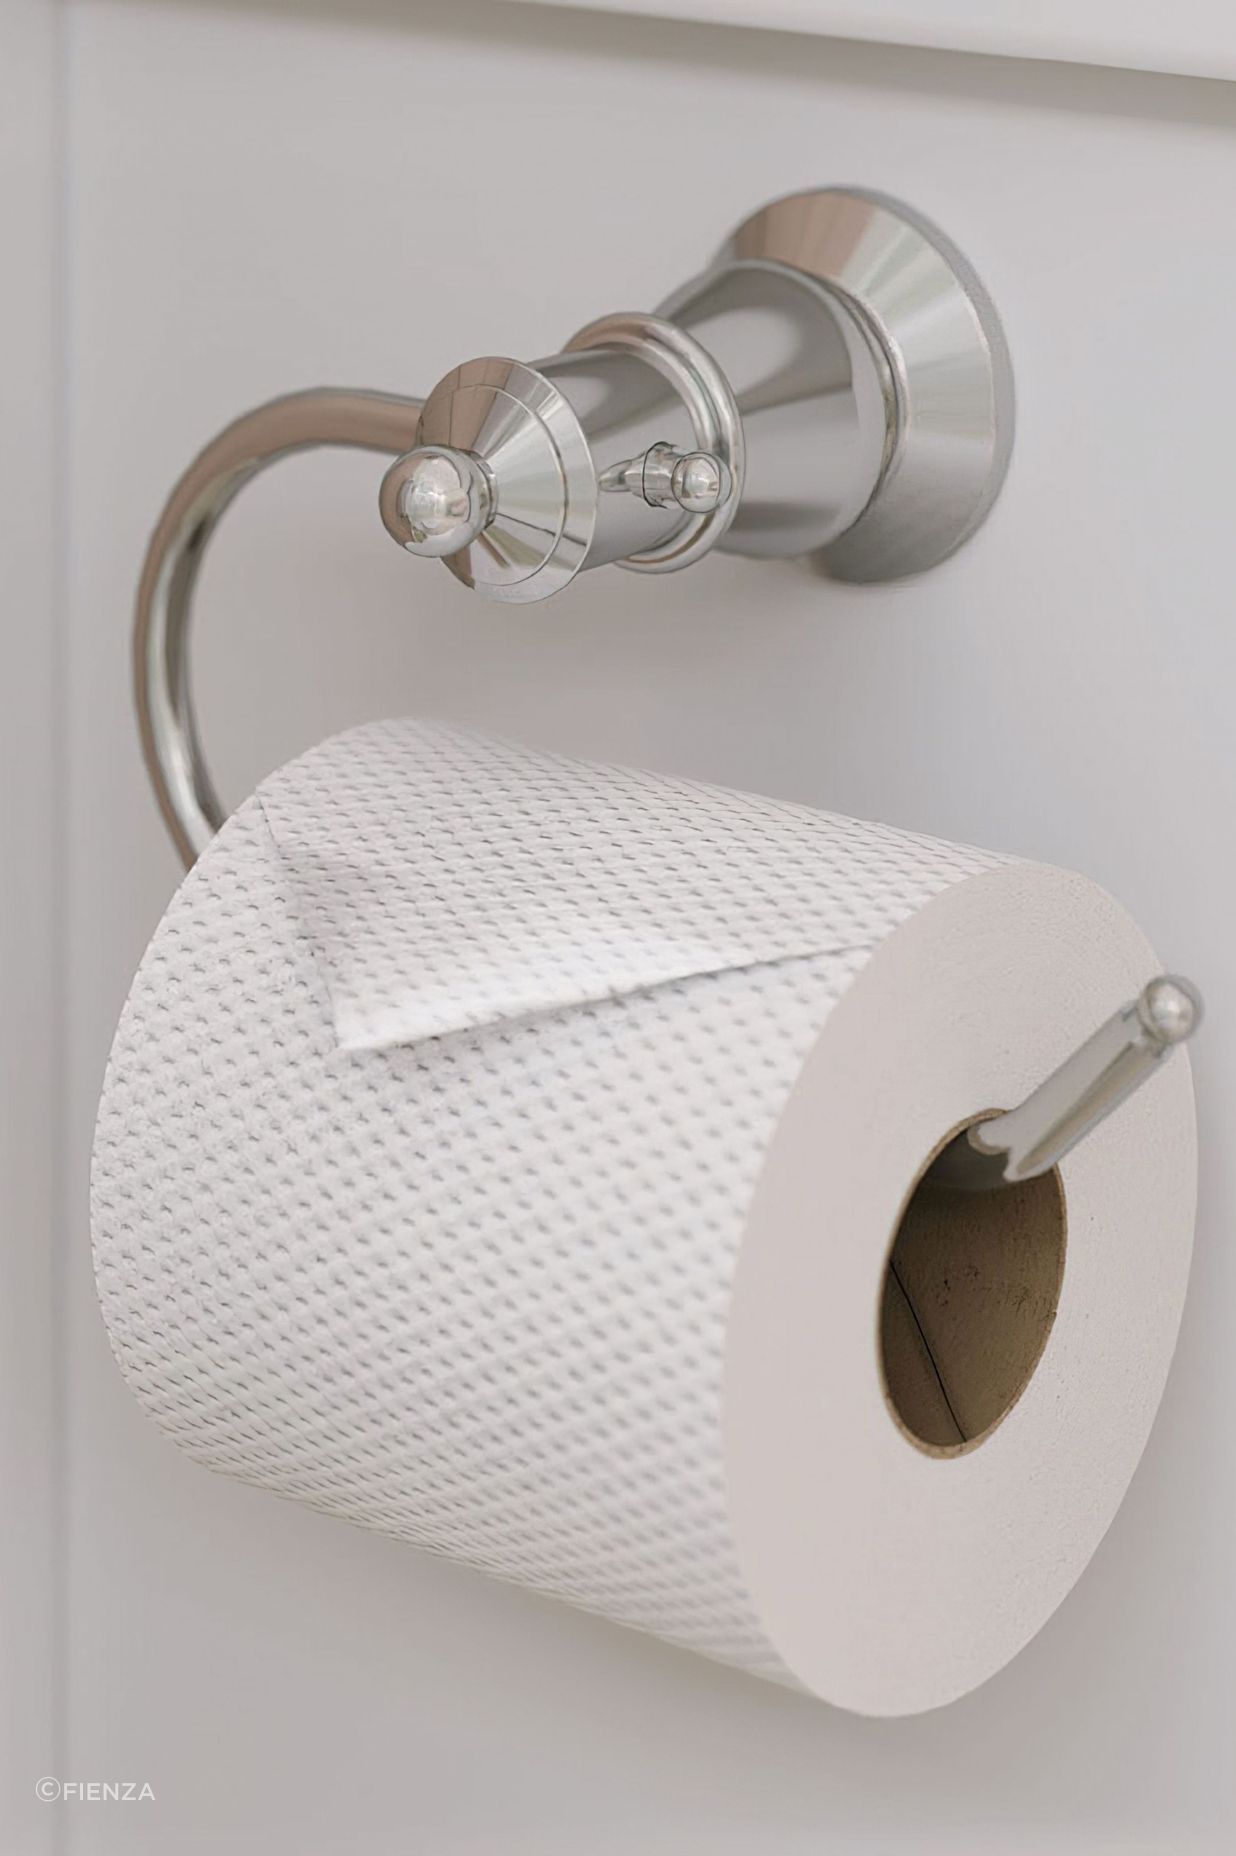 Toilet paper holders (also known as toilet roll holders) are a true bathroom essential.